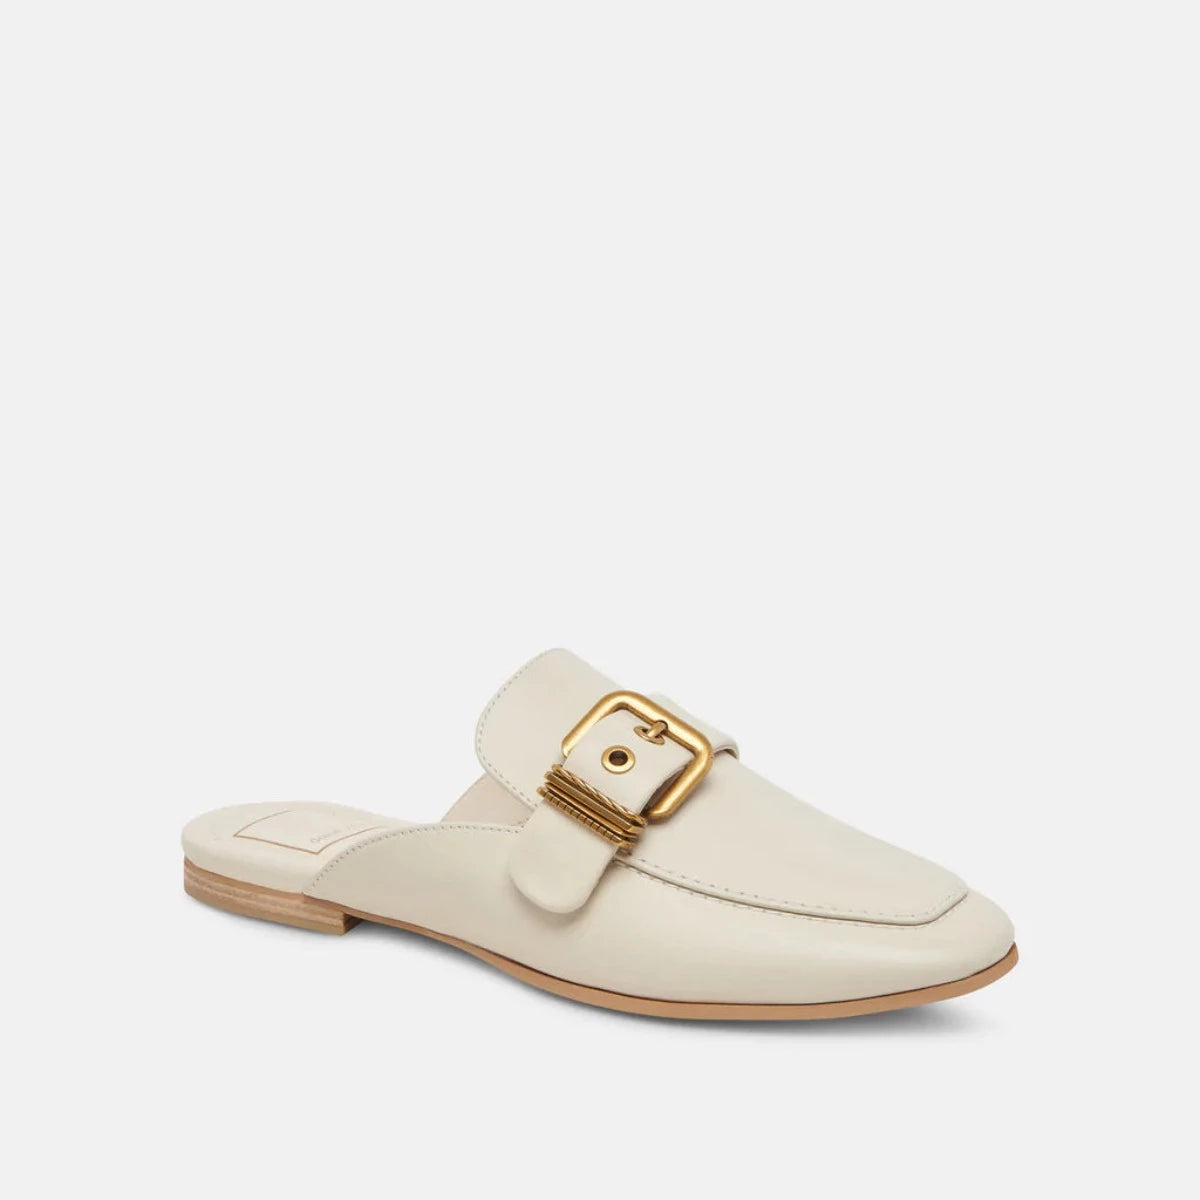 The Santel Ivory Leather Mule